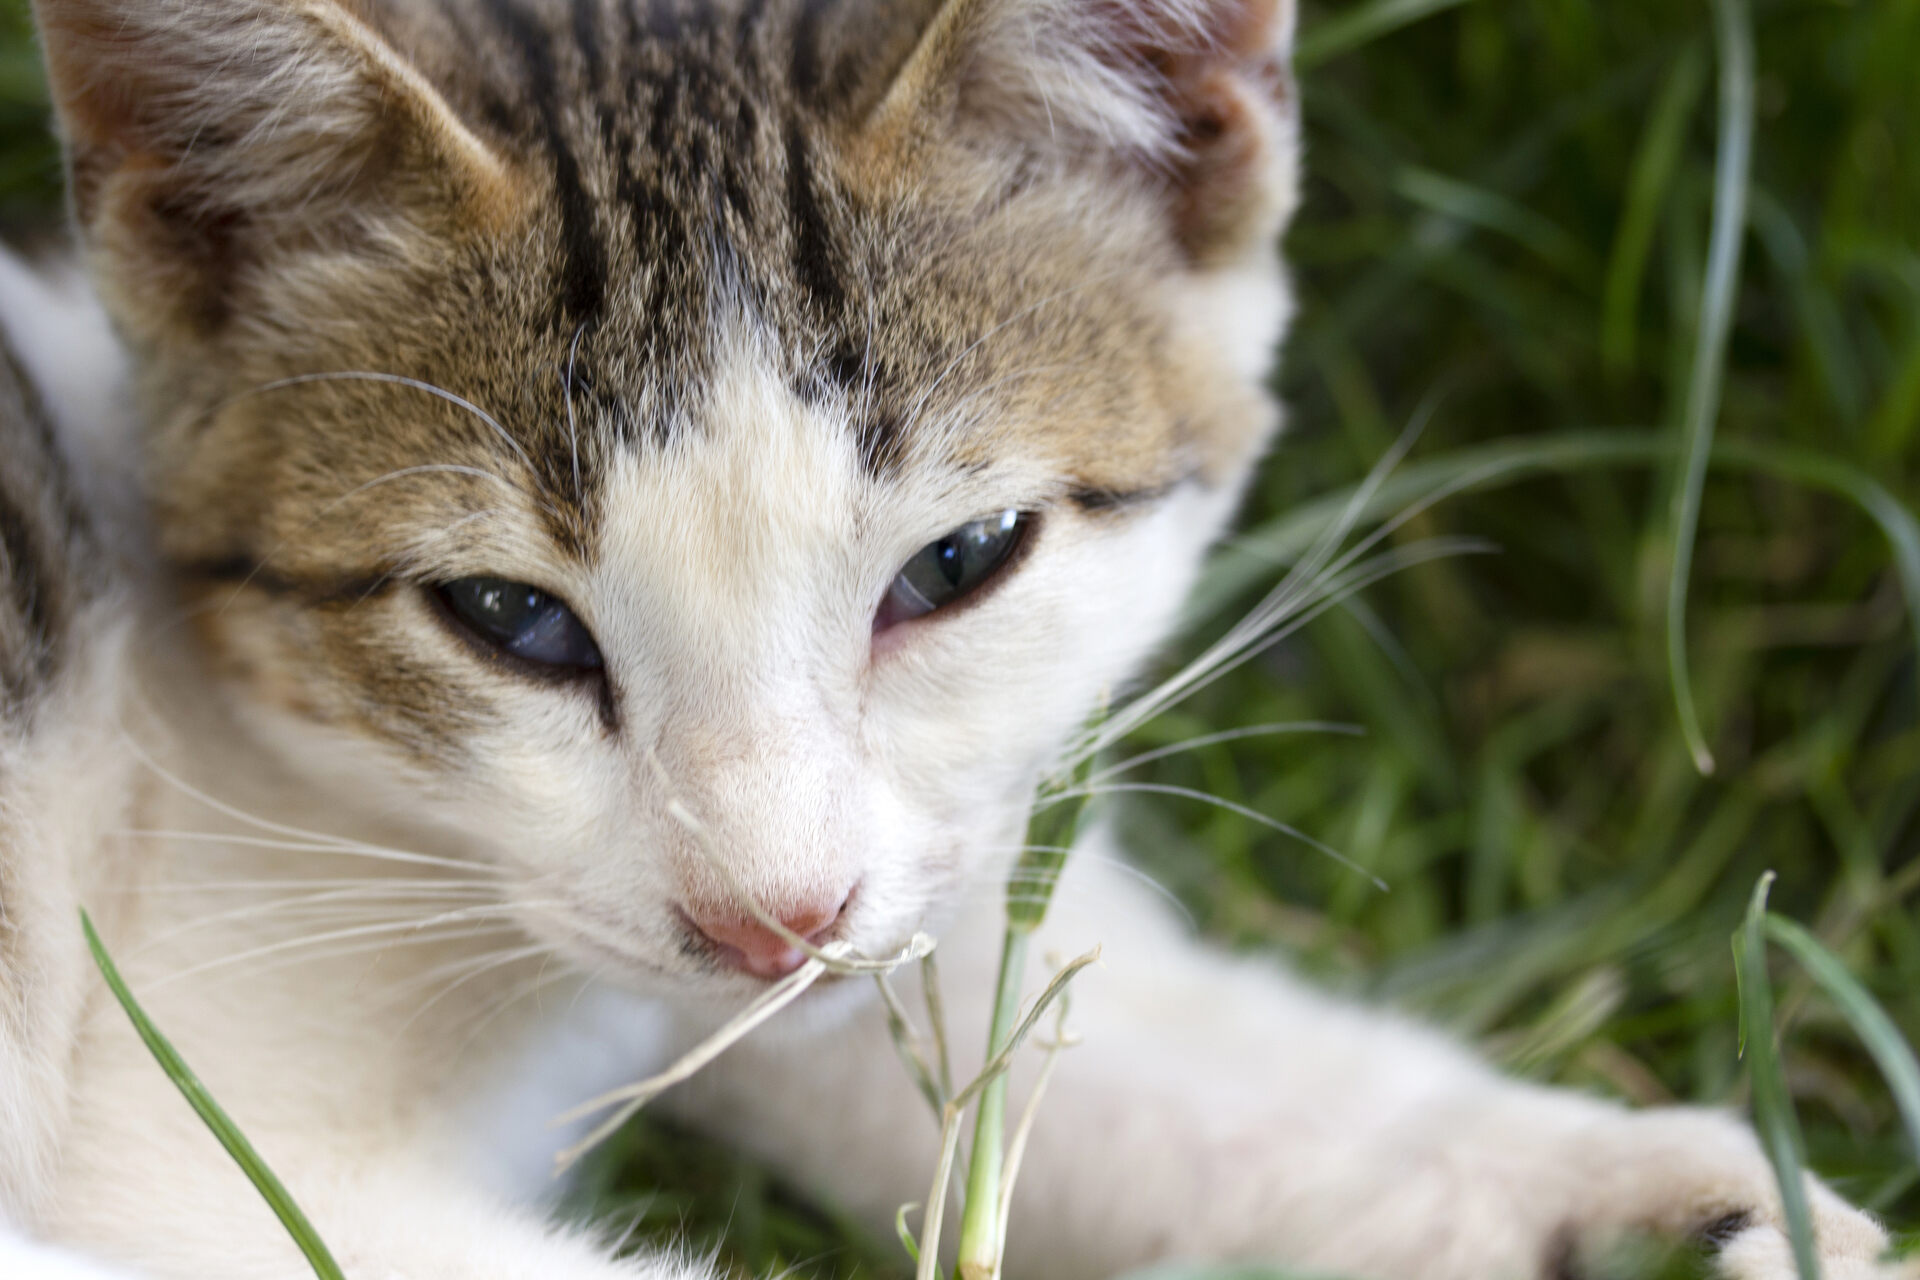 A cat sniffing a blade of grass